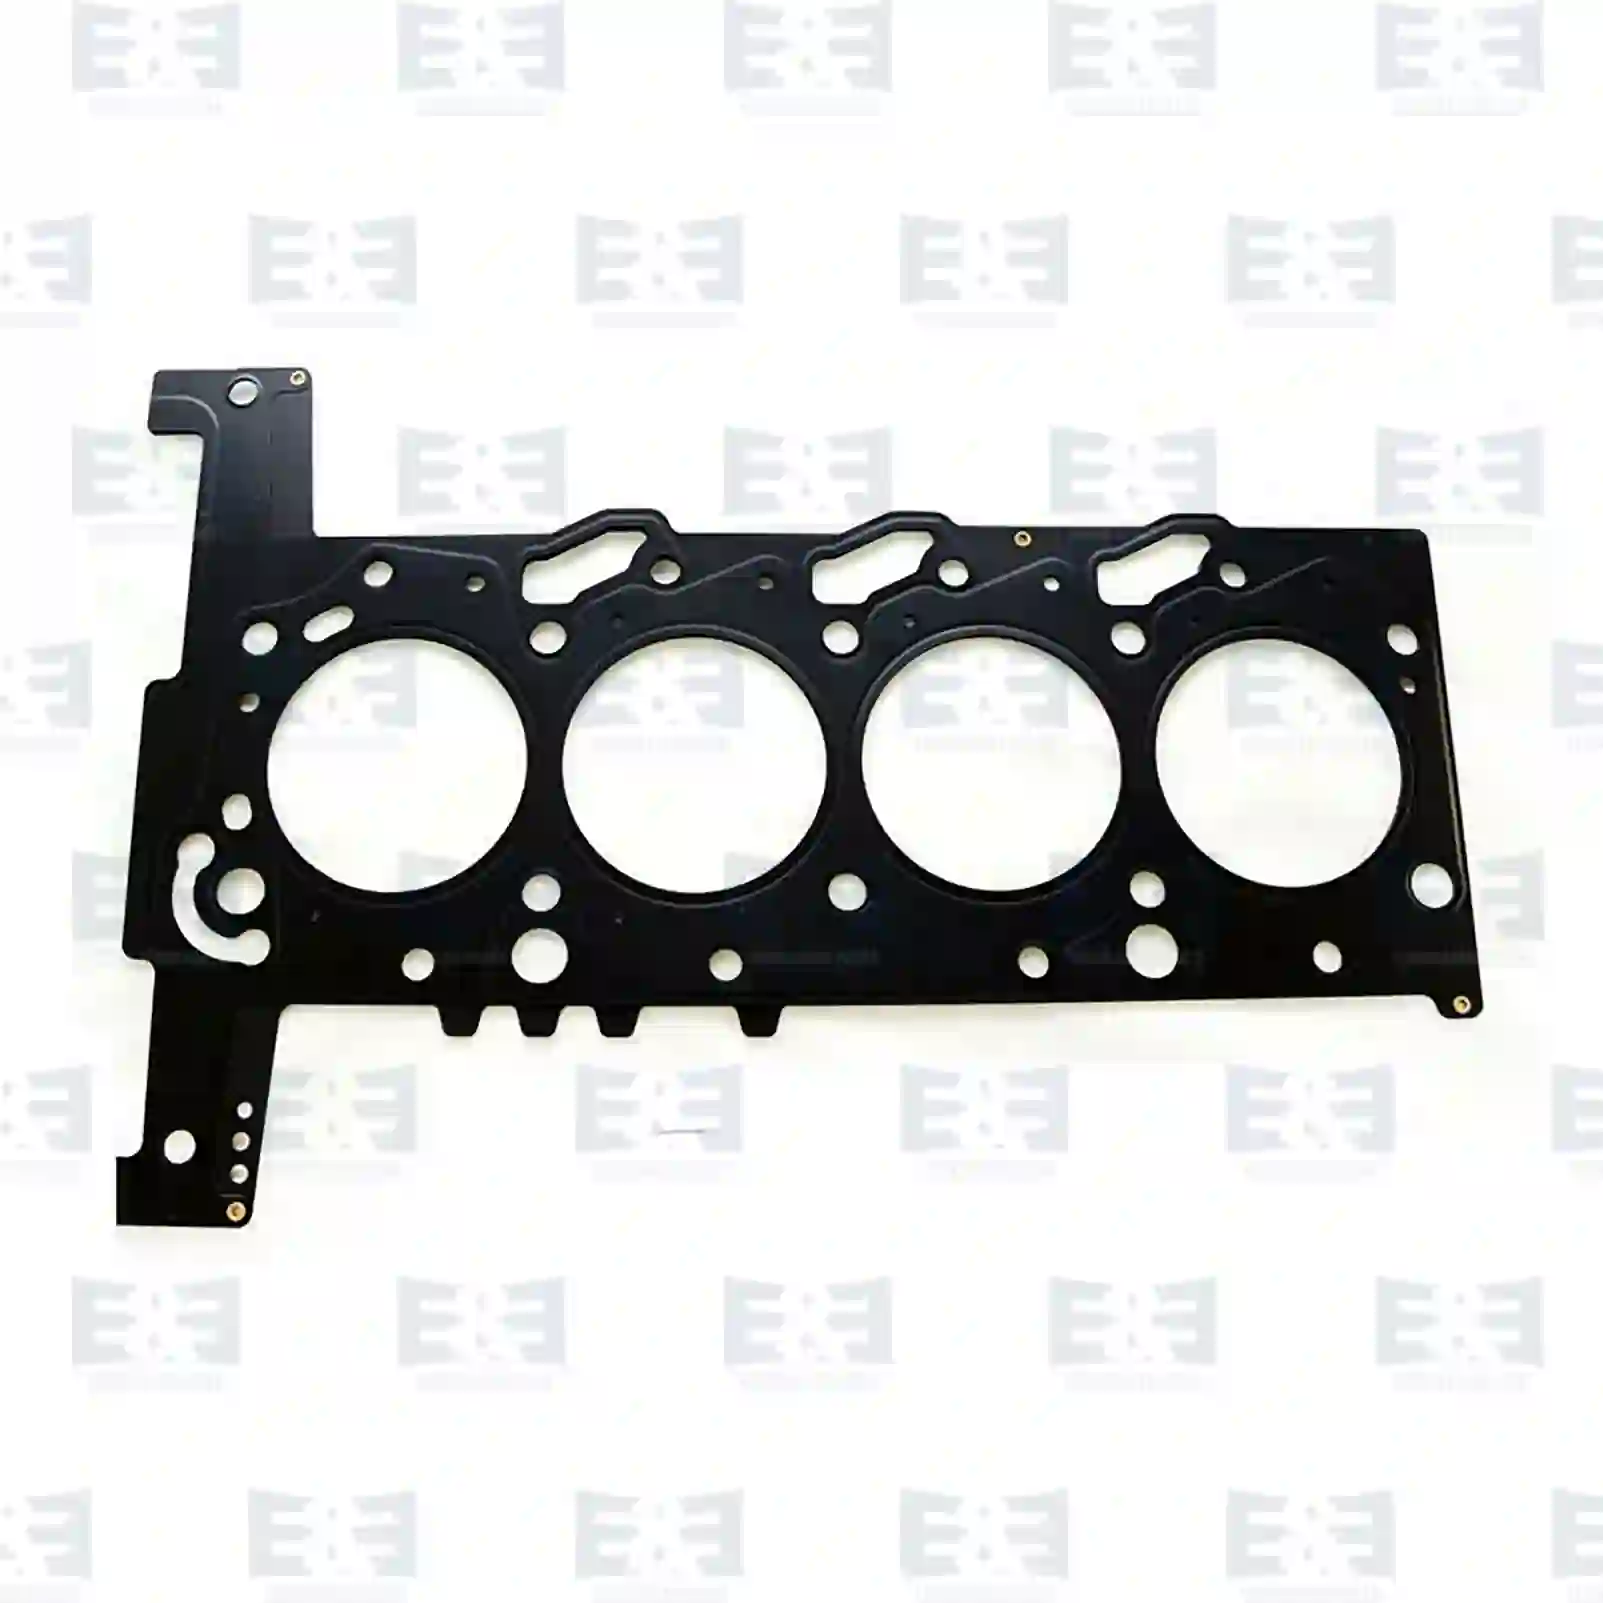 Cylinder head gasket, 2E2209891, 0209ET, 9660535080, 1372299, 1830409, 6C1Q-6051-CB, 6C1Q-6051-CC, 0209ET ||  2E2209891 E&E Truck Spare Parts | Truck Spare Parts, Auotomotive Spare Parts Cylinder head gasket, 2E2209891, 0209ET, 9660535080, 1372299, 1830409, 6C1Q-6051-CB, 6C1Q-6051-CC, 0209ET ||  2E2209891 E&E Truck Spare Parts | Truck Spare Parts, Auotomotive Spare Parts